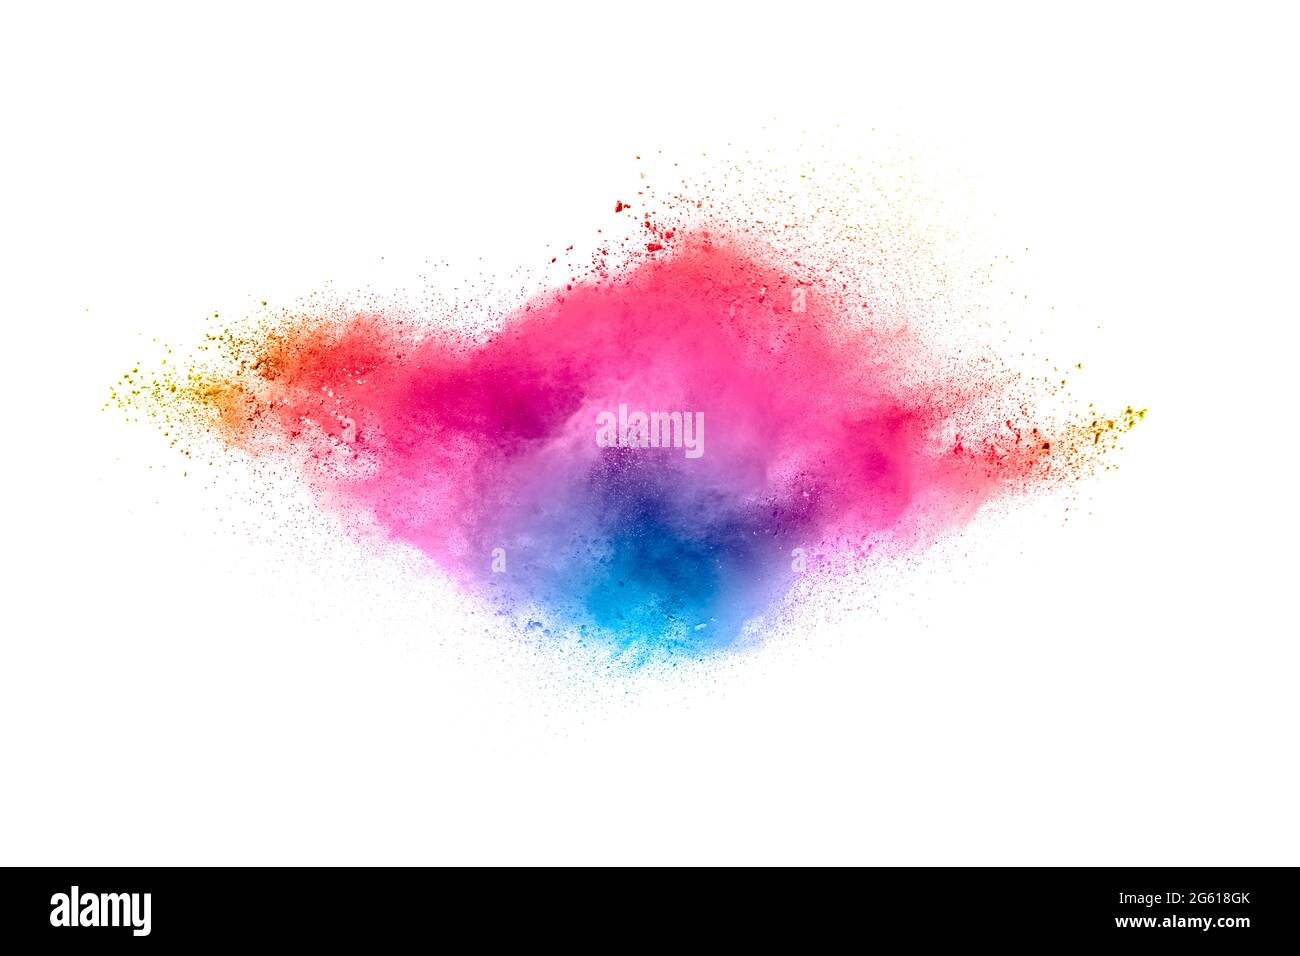 Abstract blurred motion of colorful dust particles on black background. Stock Photo